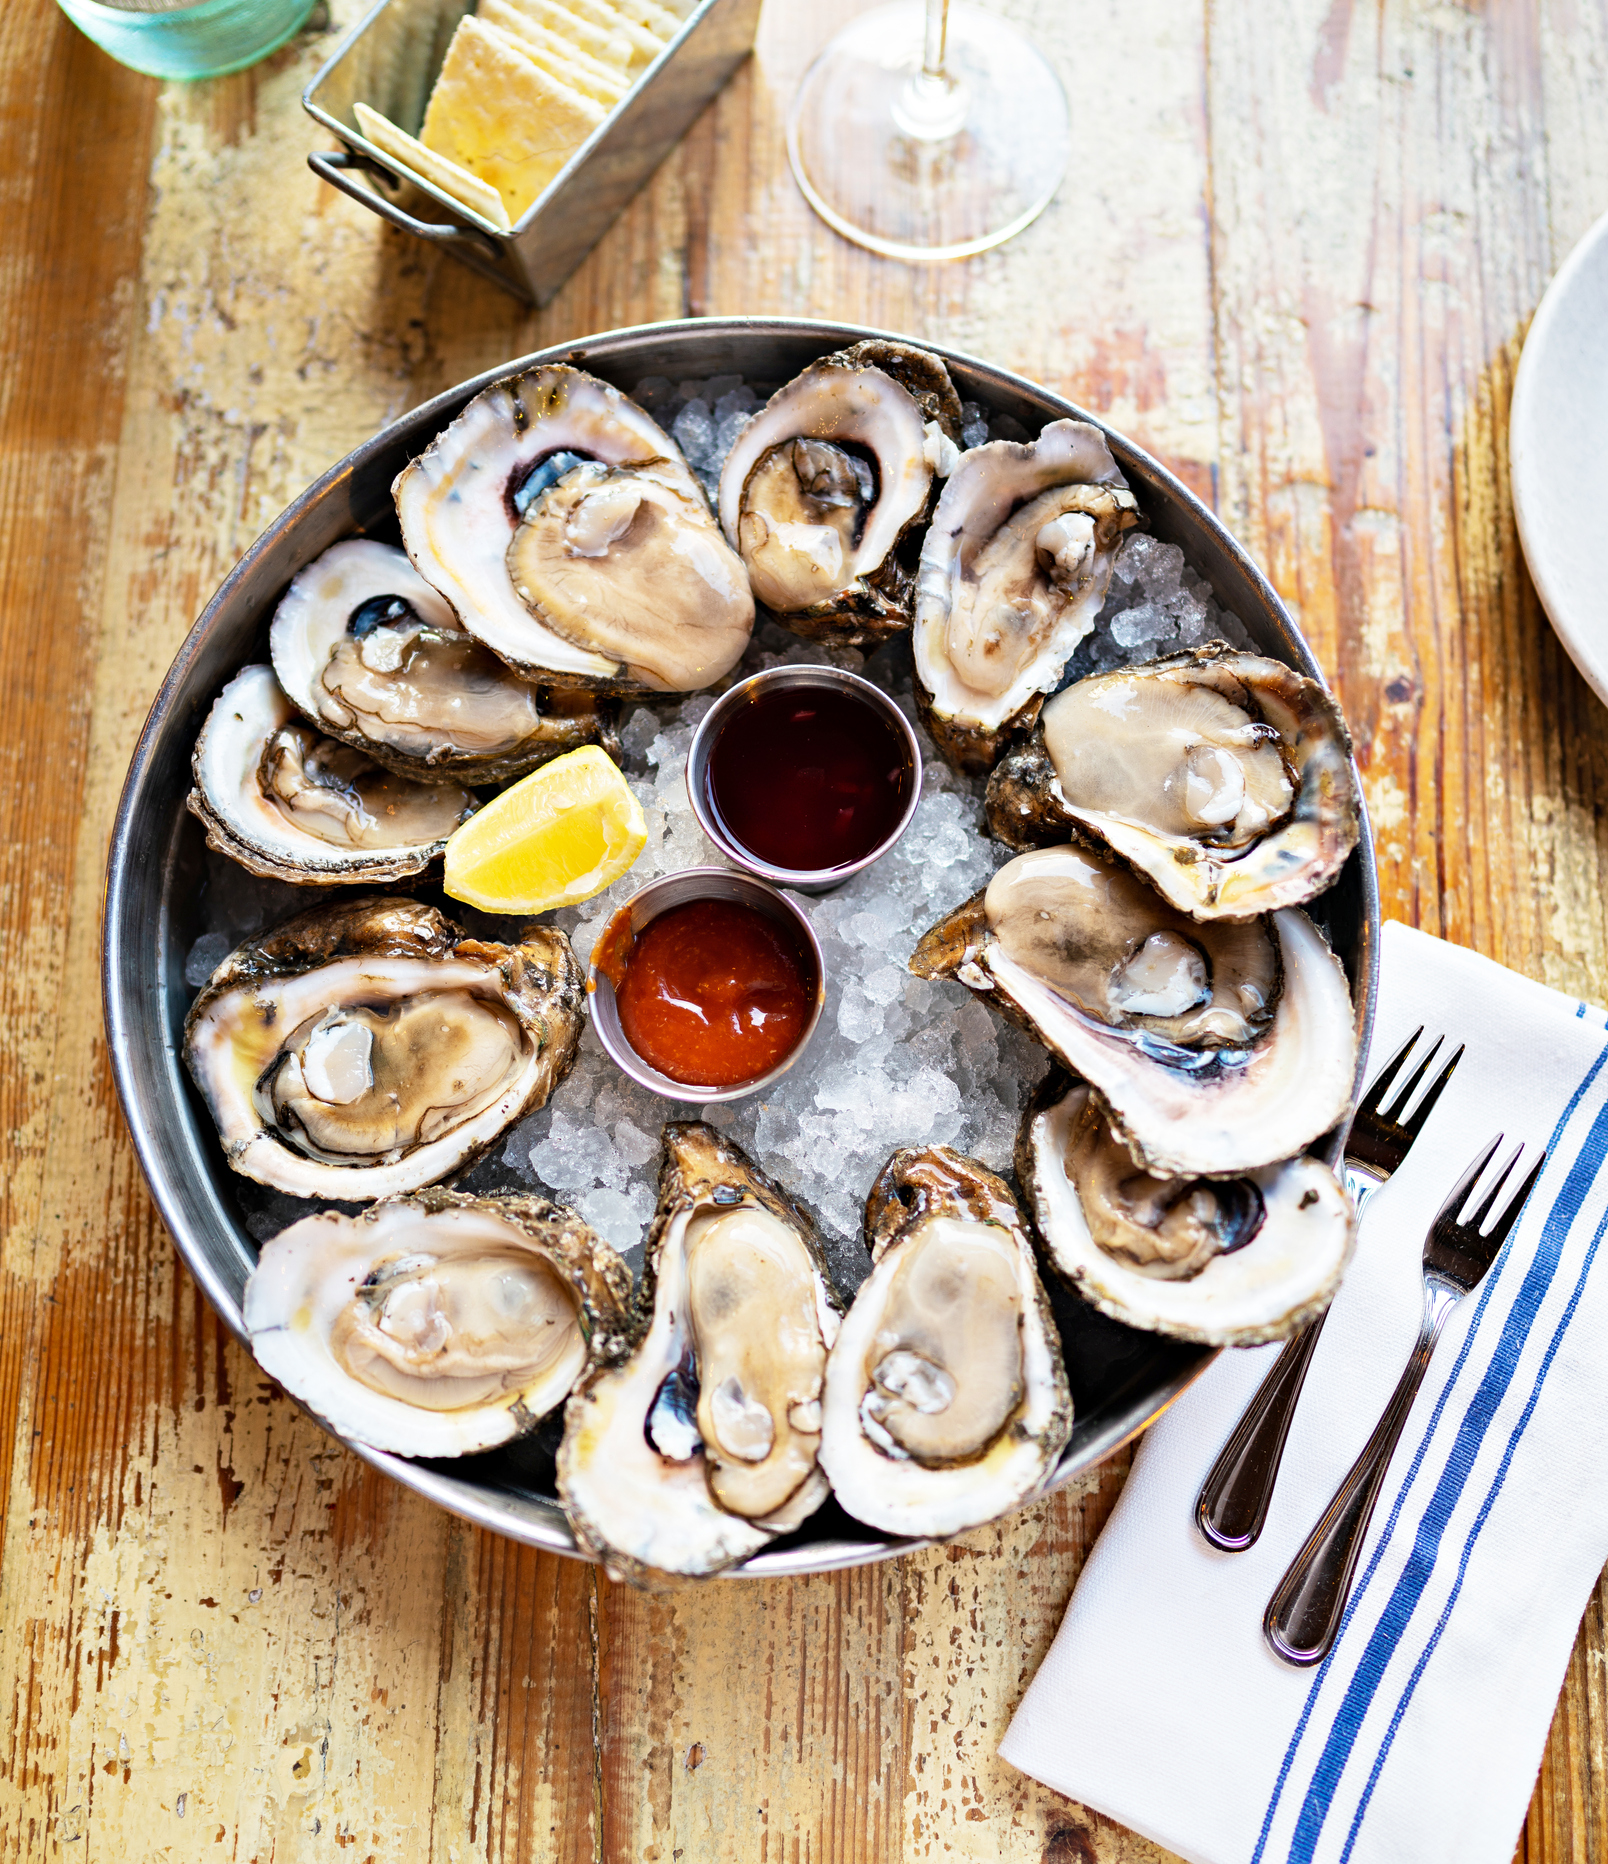 Shucked oysters